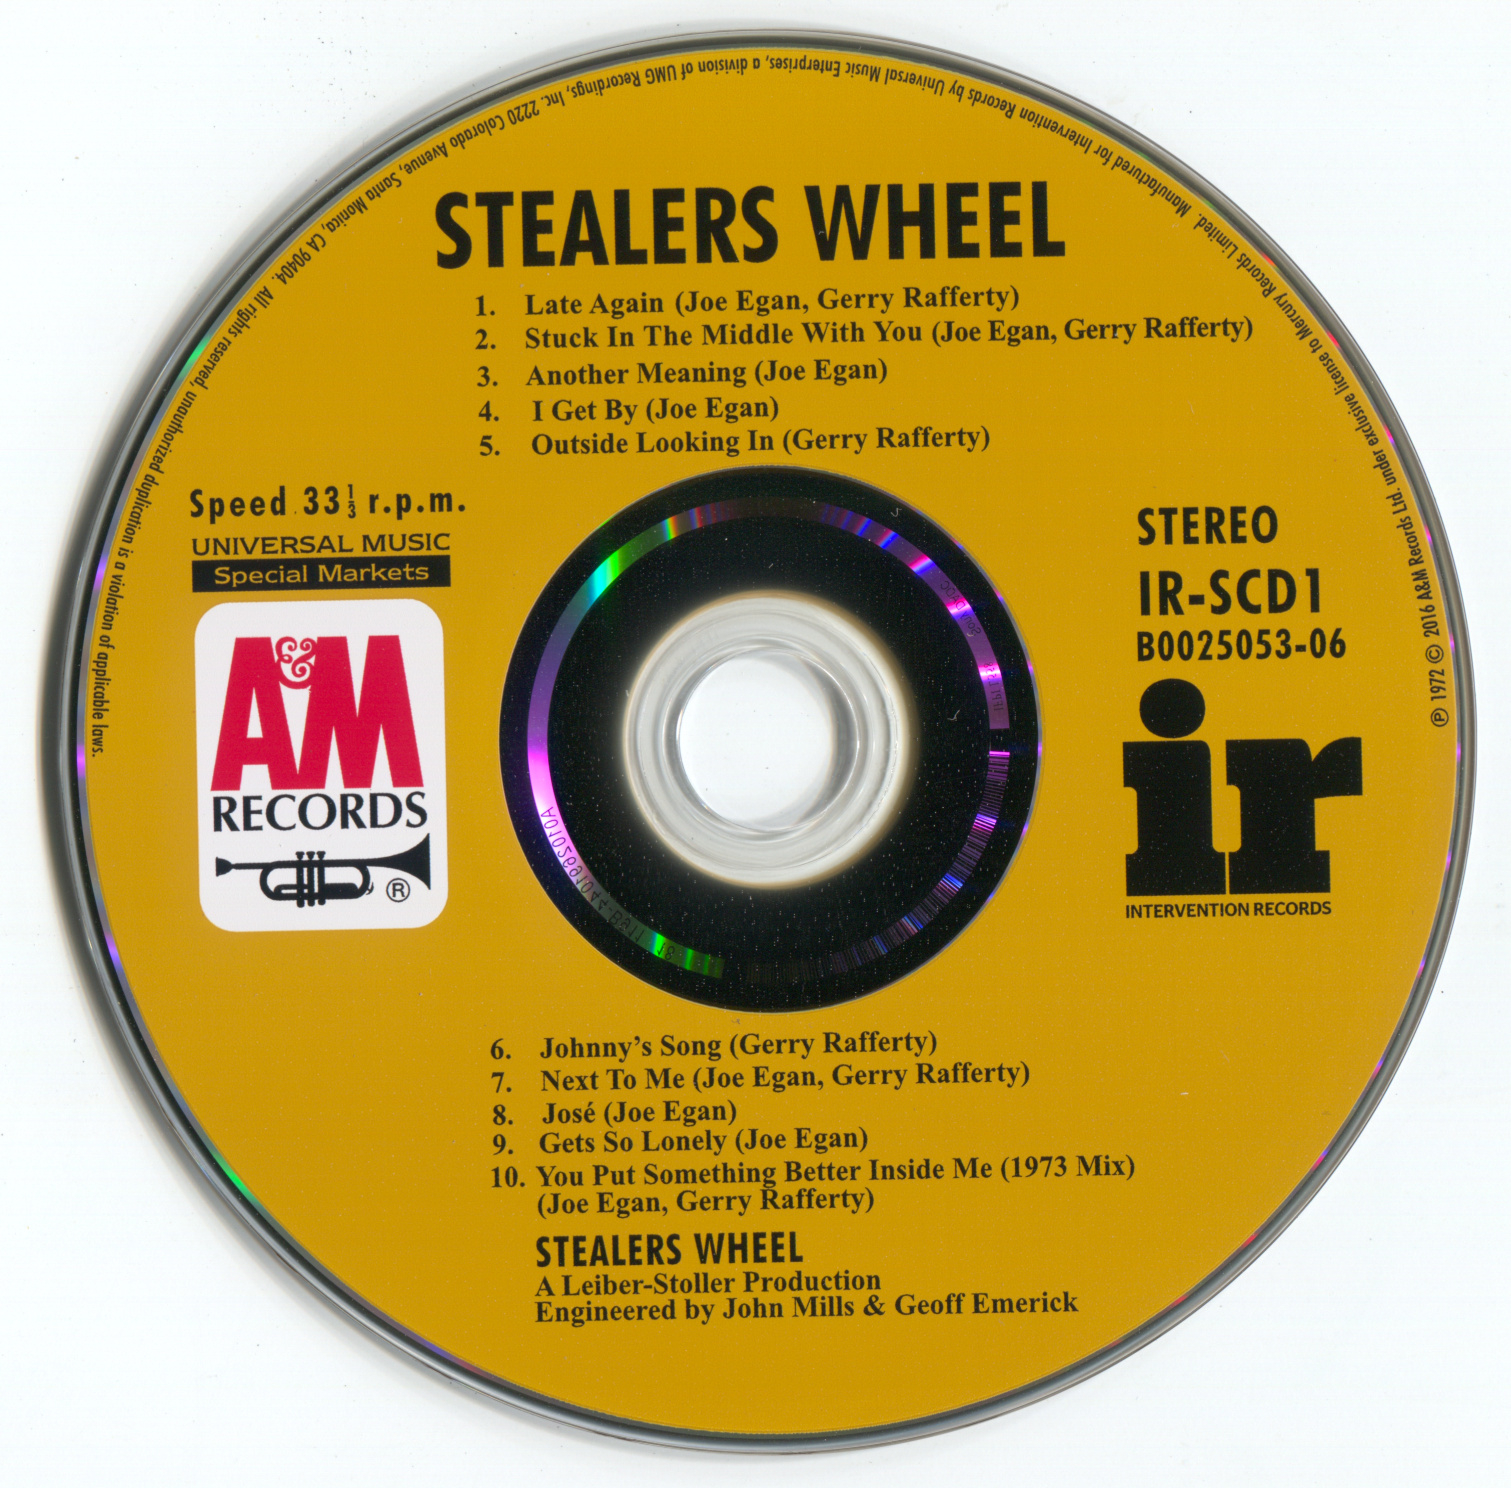 Flac rar. Stealers Wheel Stealers Wheel. Stealers Wheel Википедия. Stealers Wheel Stealers Wheel 1972 album. Stuck in the Middle with you Stealers Wheel.